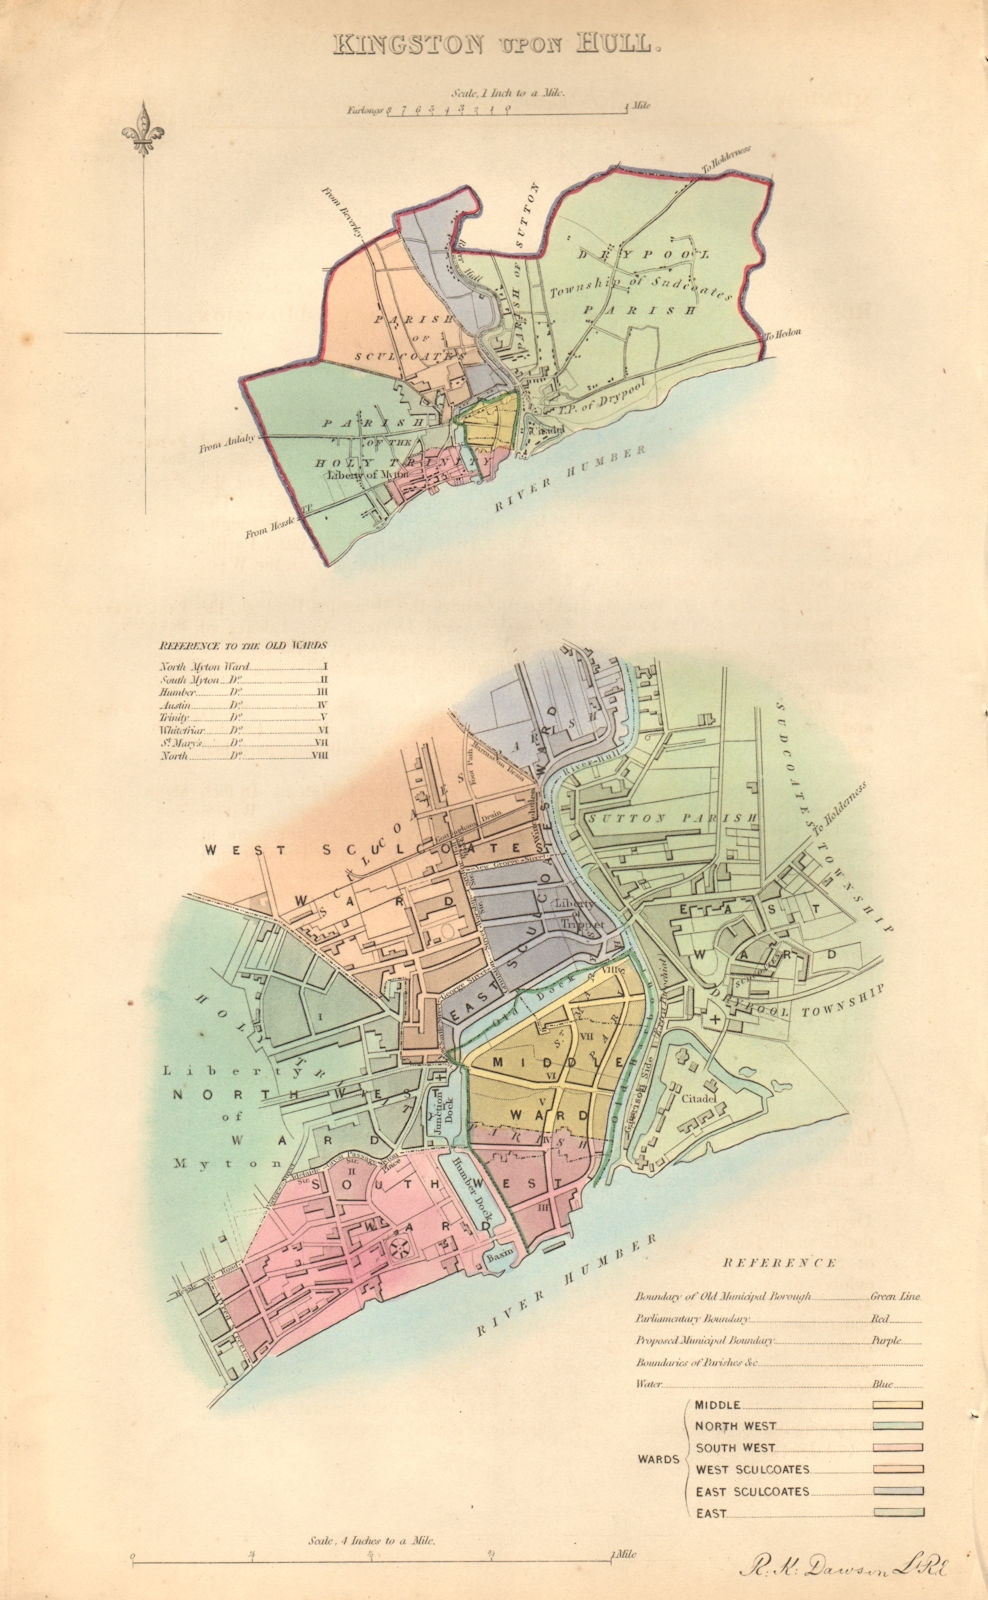 Associate Product KINGSTON-UPON-HULL borough/town/city plan. BOUNDARY COMMISSION. DAWSON 1837 map